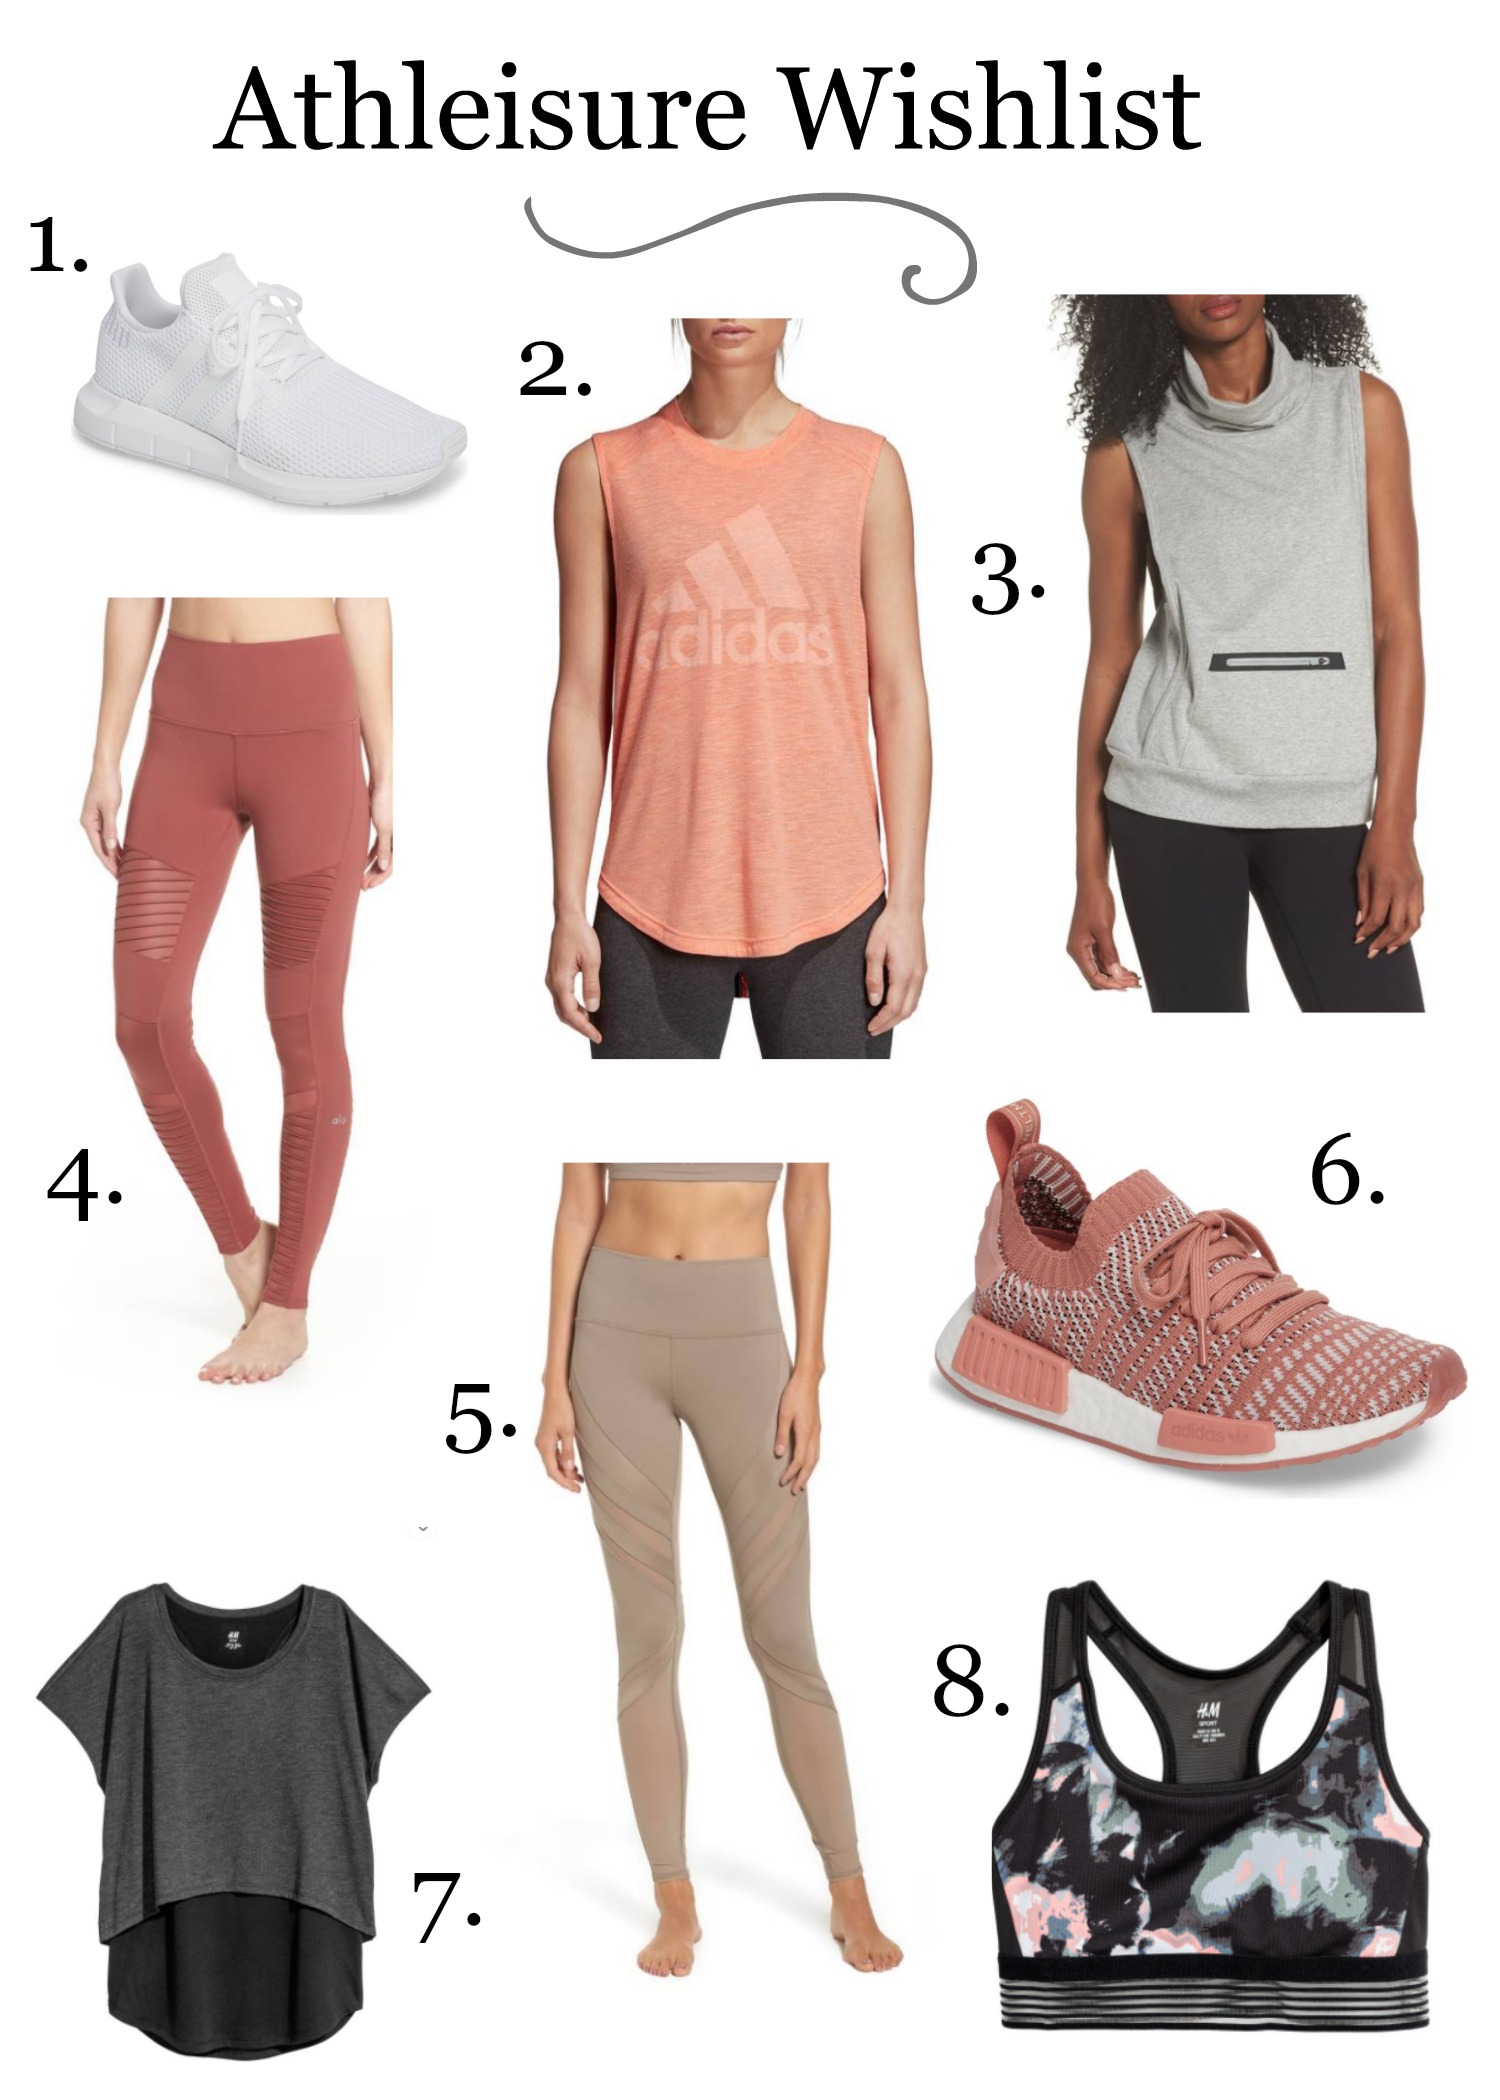 Get Your Athleisure Fix with These Key Pieces. | Le Stylo Rouge